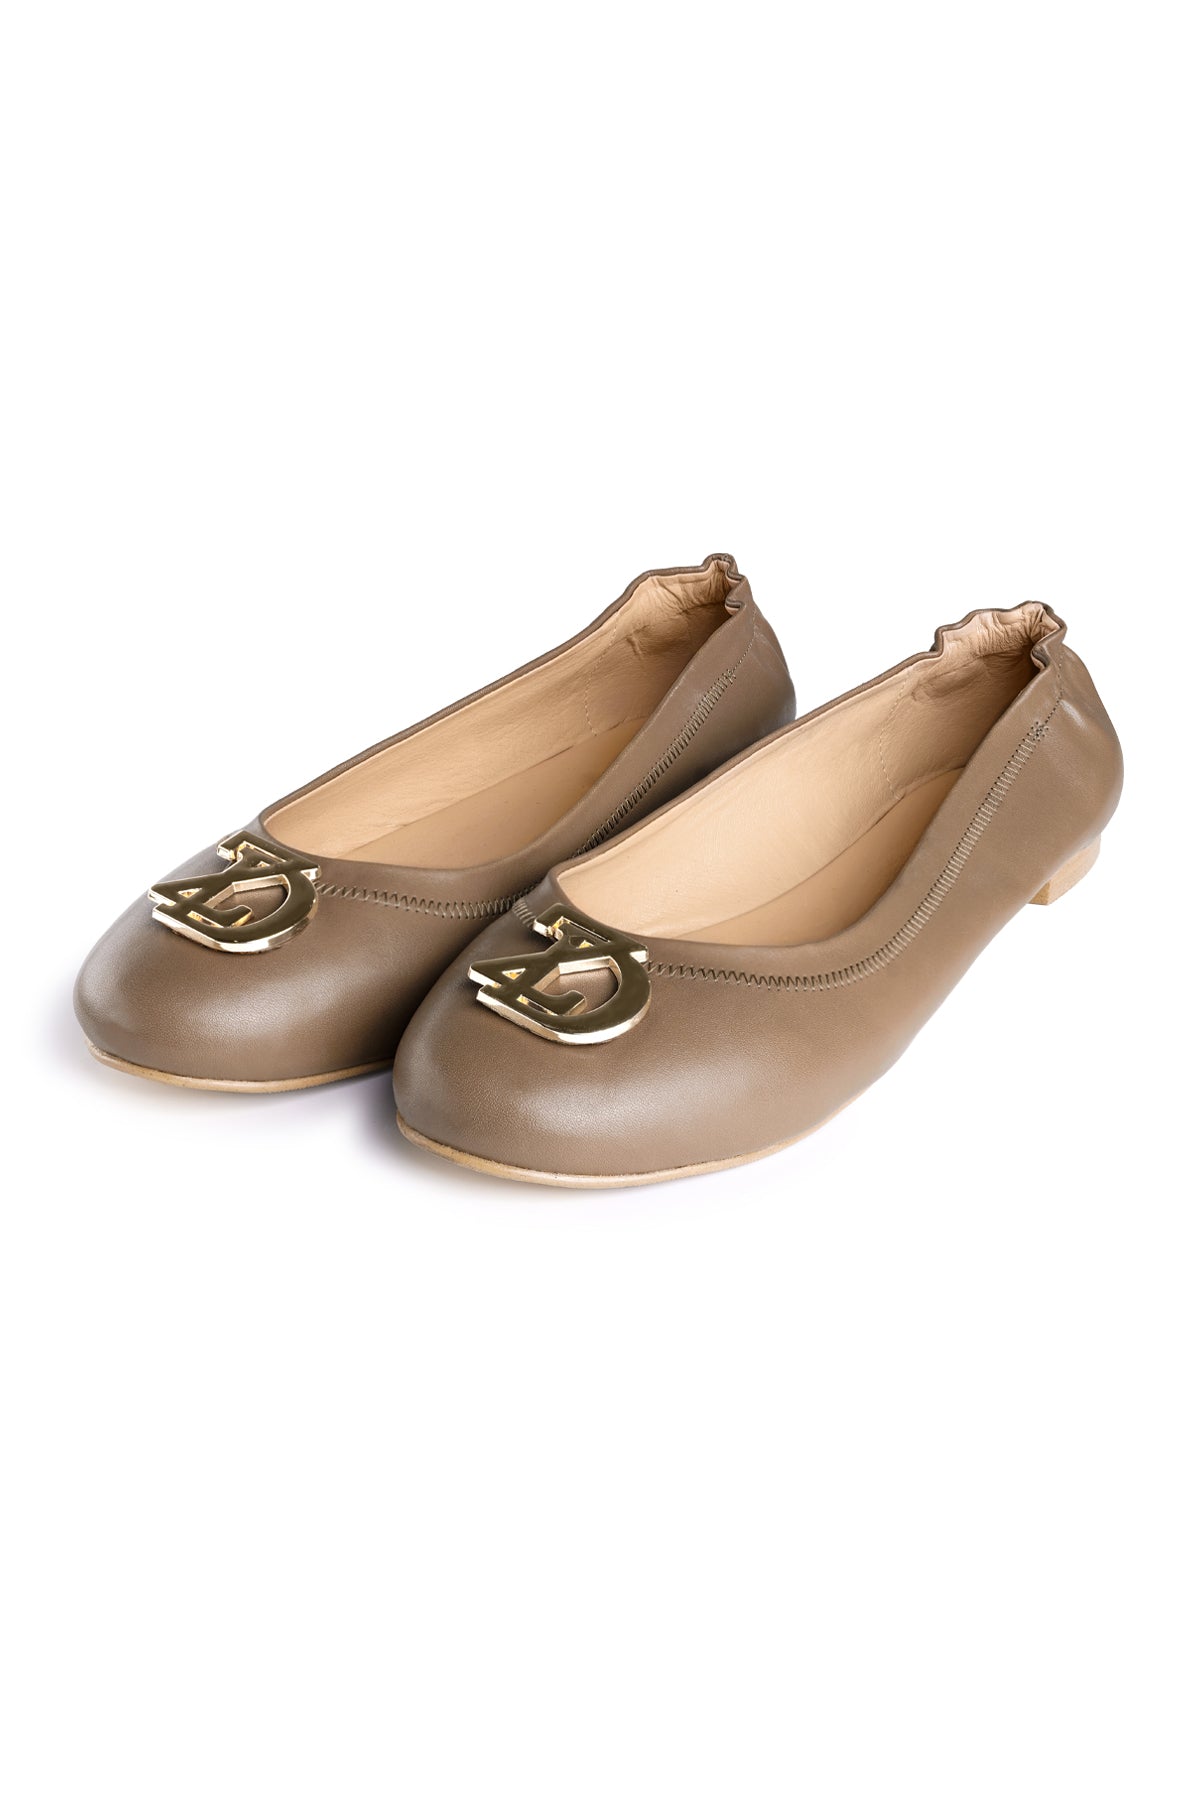 Alicia Shoes - Taupe